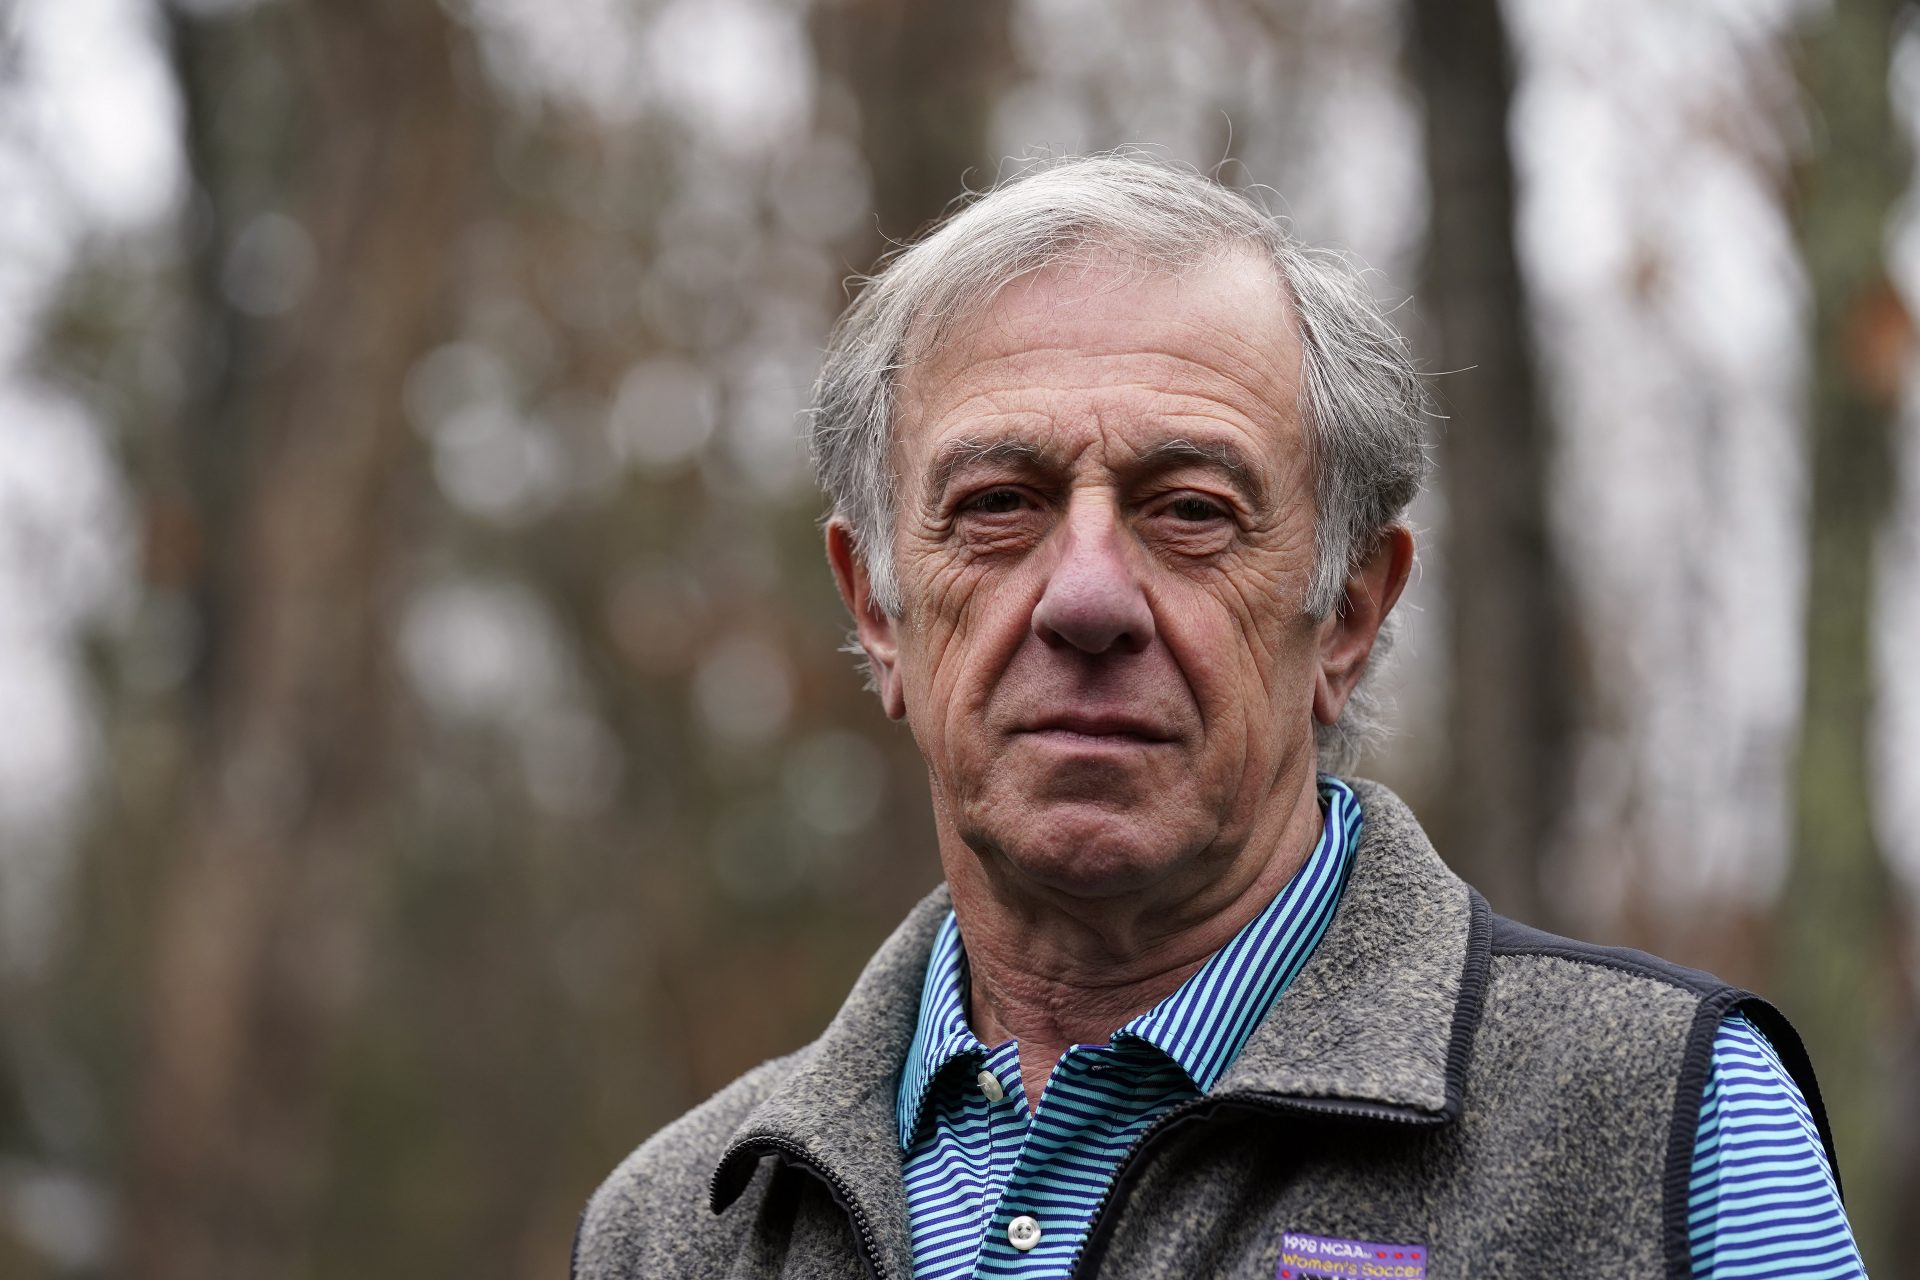 Dan Costa, retired National Program Director for the Air Climate & Energy Research Program at the Environmental Protection Agency, EPA, is seen at his Chapel Hill, N.C. home, Tuesday, Jan. 26, 2021.